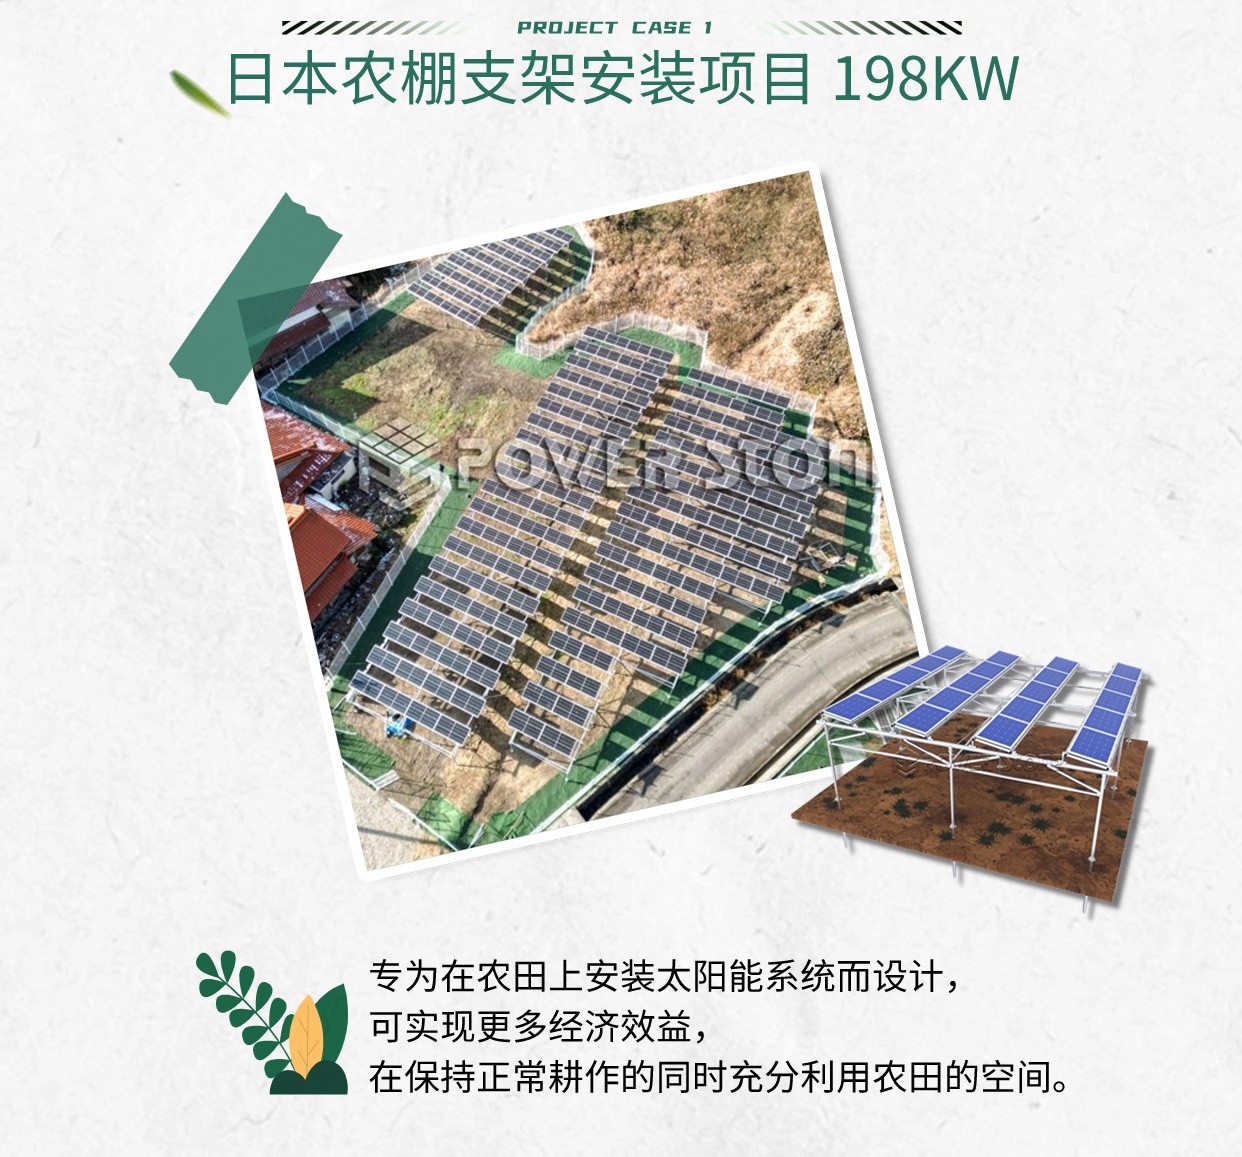 solar pv mount structure